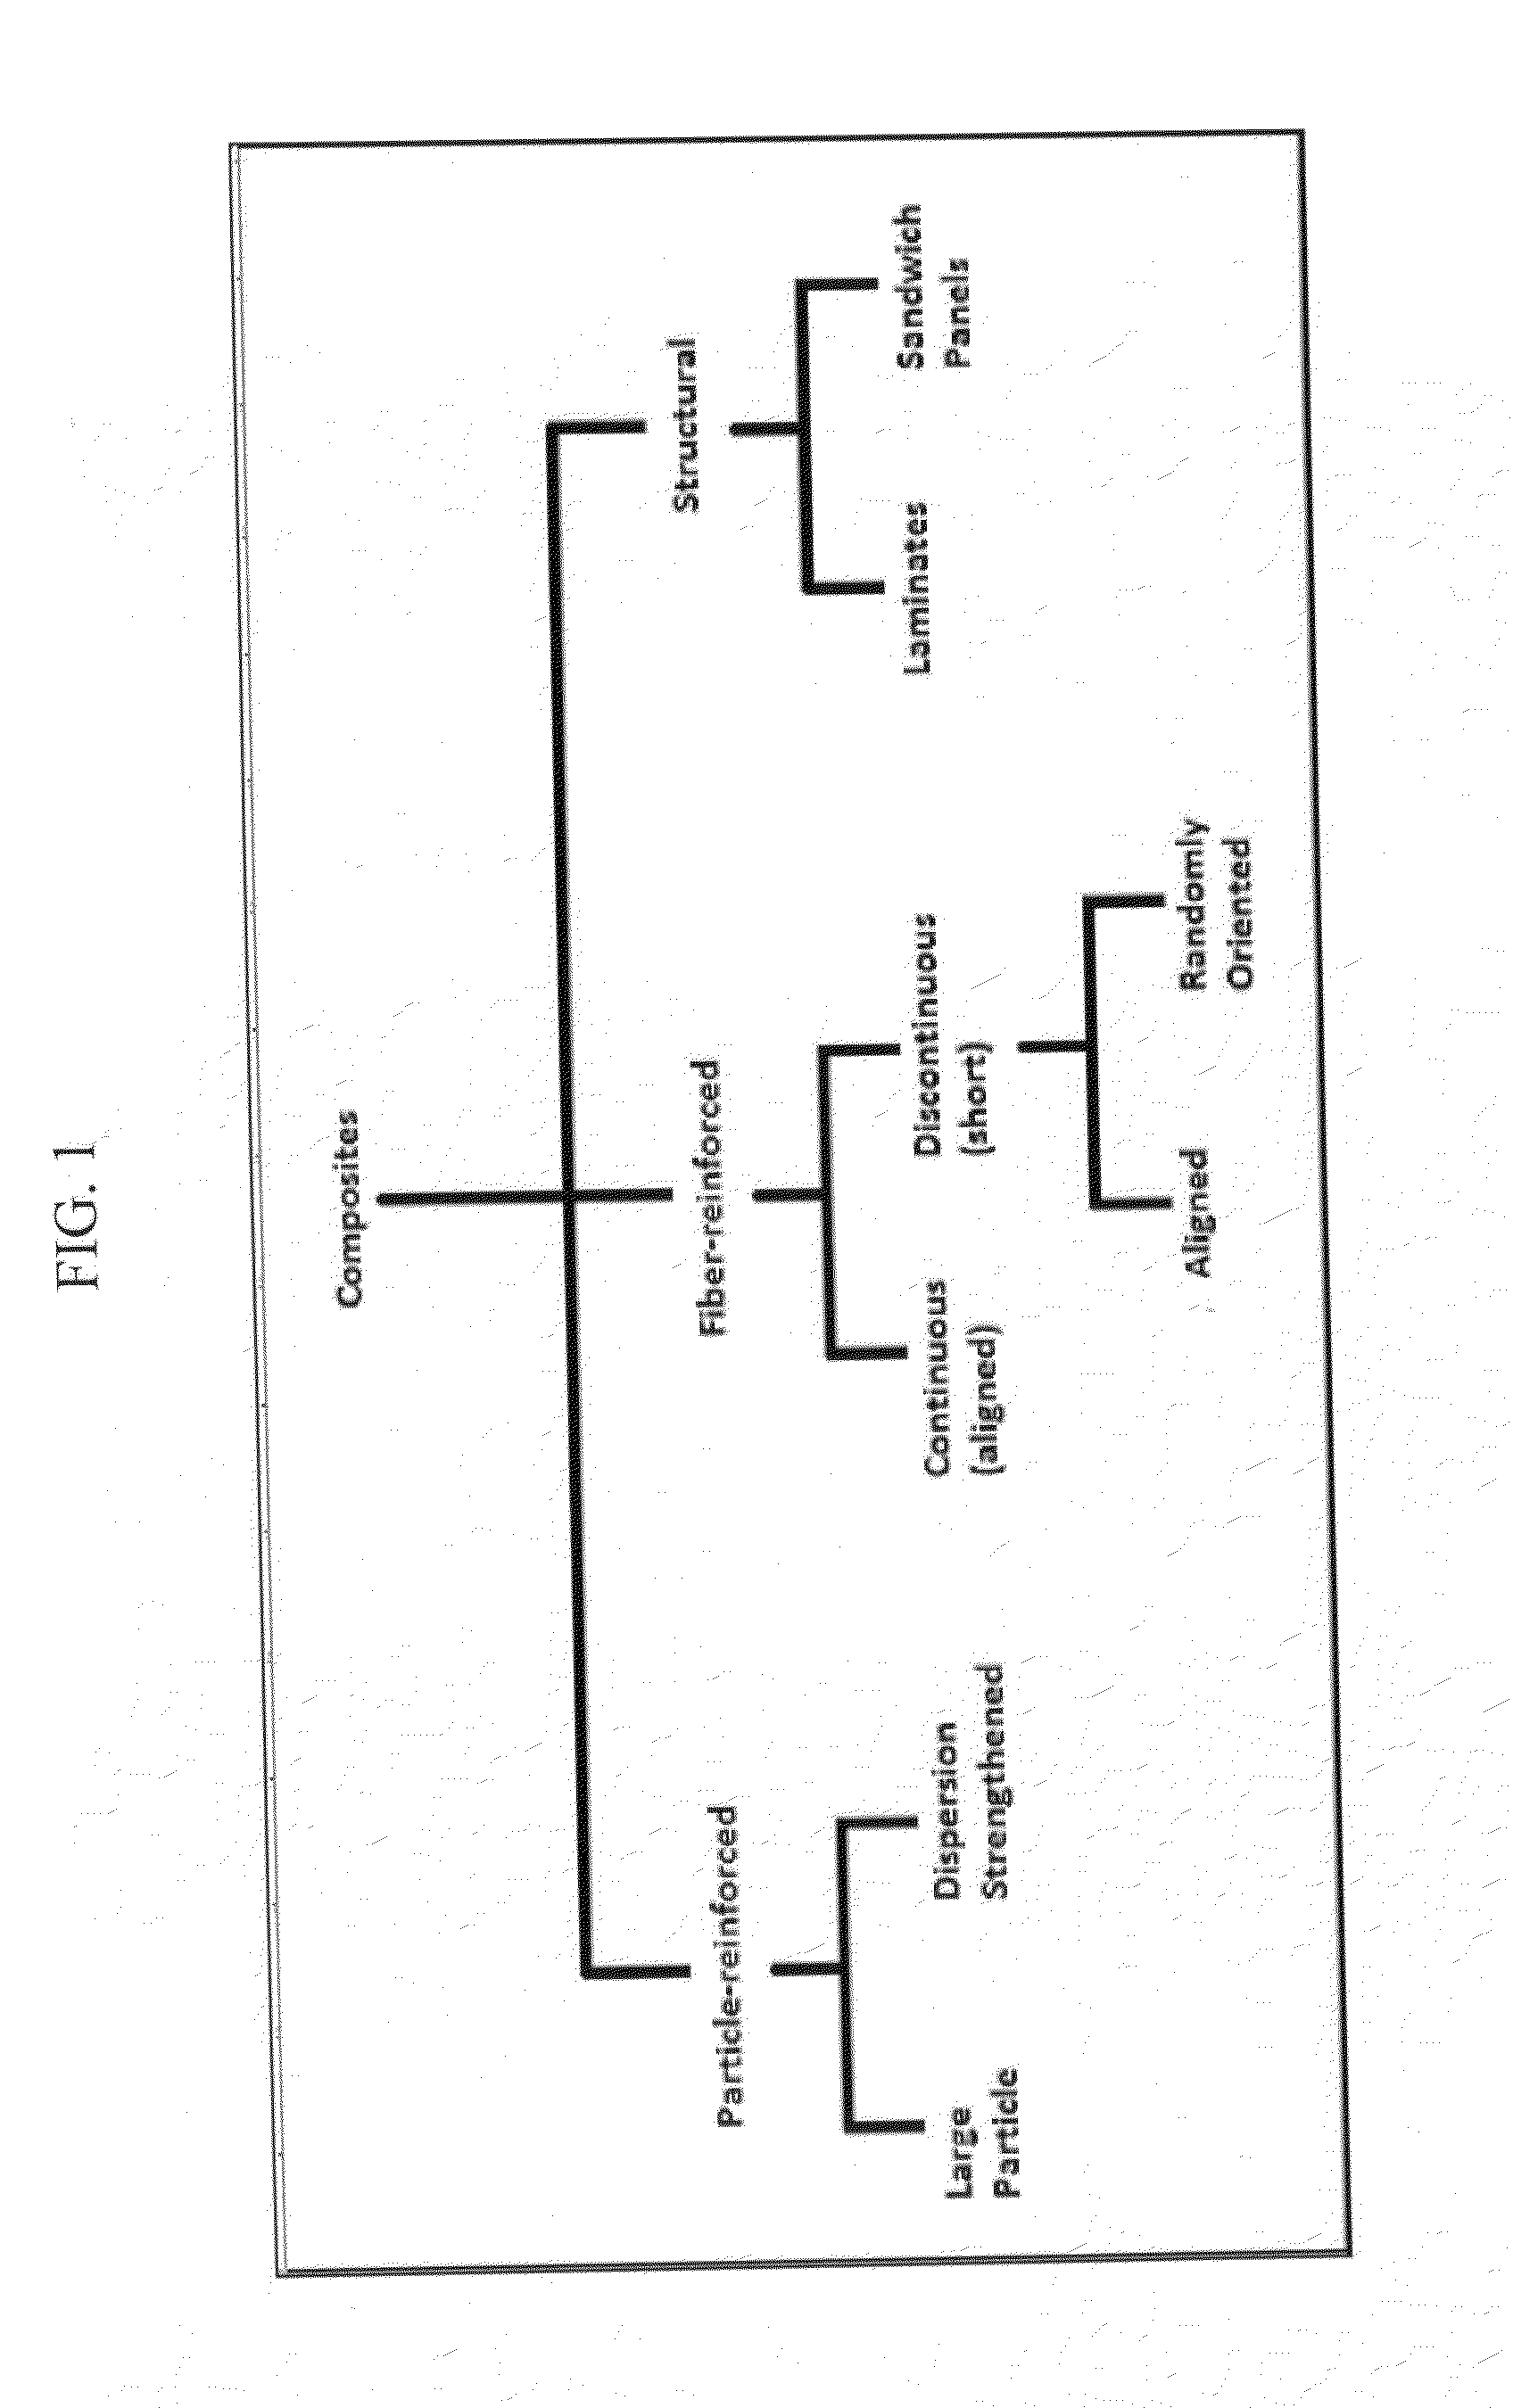 Method and apparatus for characterizing composite materials using an artificial neural network